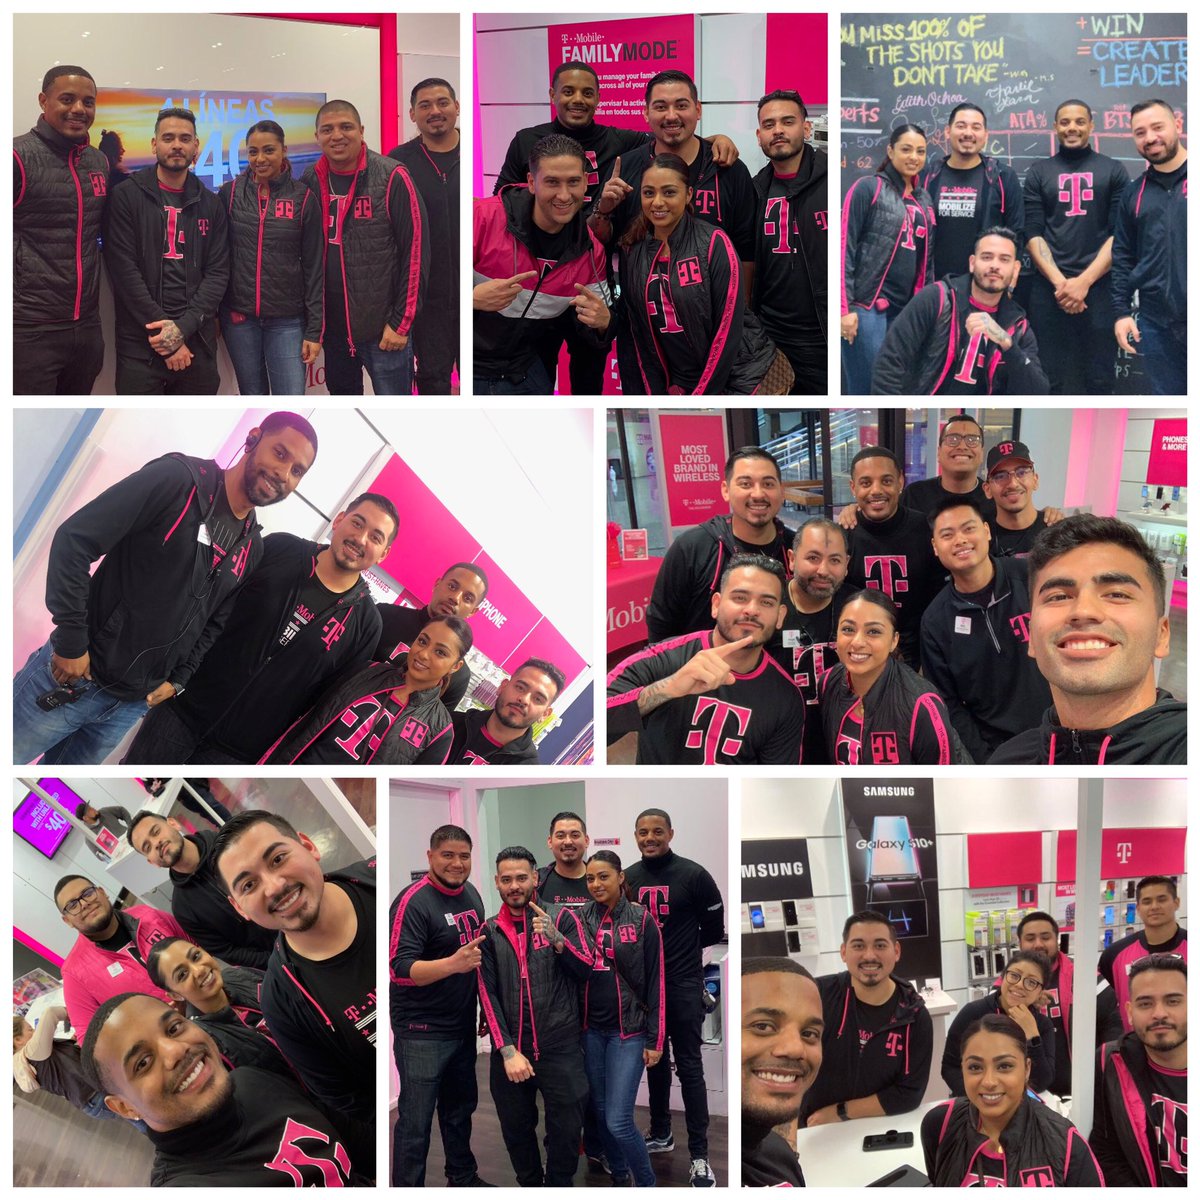 Spent the day with these awesome guys visiting our DTLA stores! This team is in it to WIN it!! #DTLAW #WinForeverLA #AccessoryCoHorts #ATA  @DonJordanVR @Daniel_Saucedo5 @AnthonyLTMO